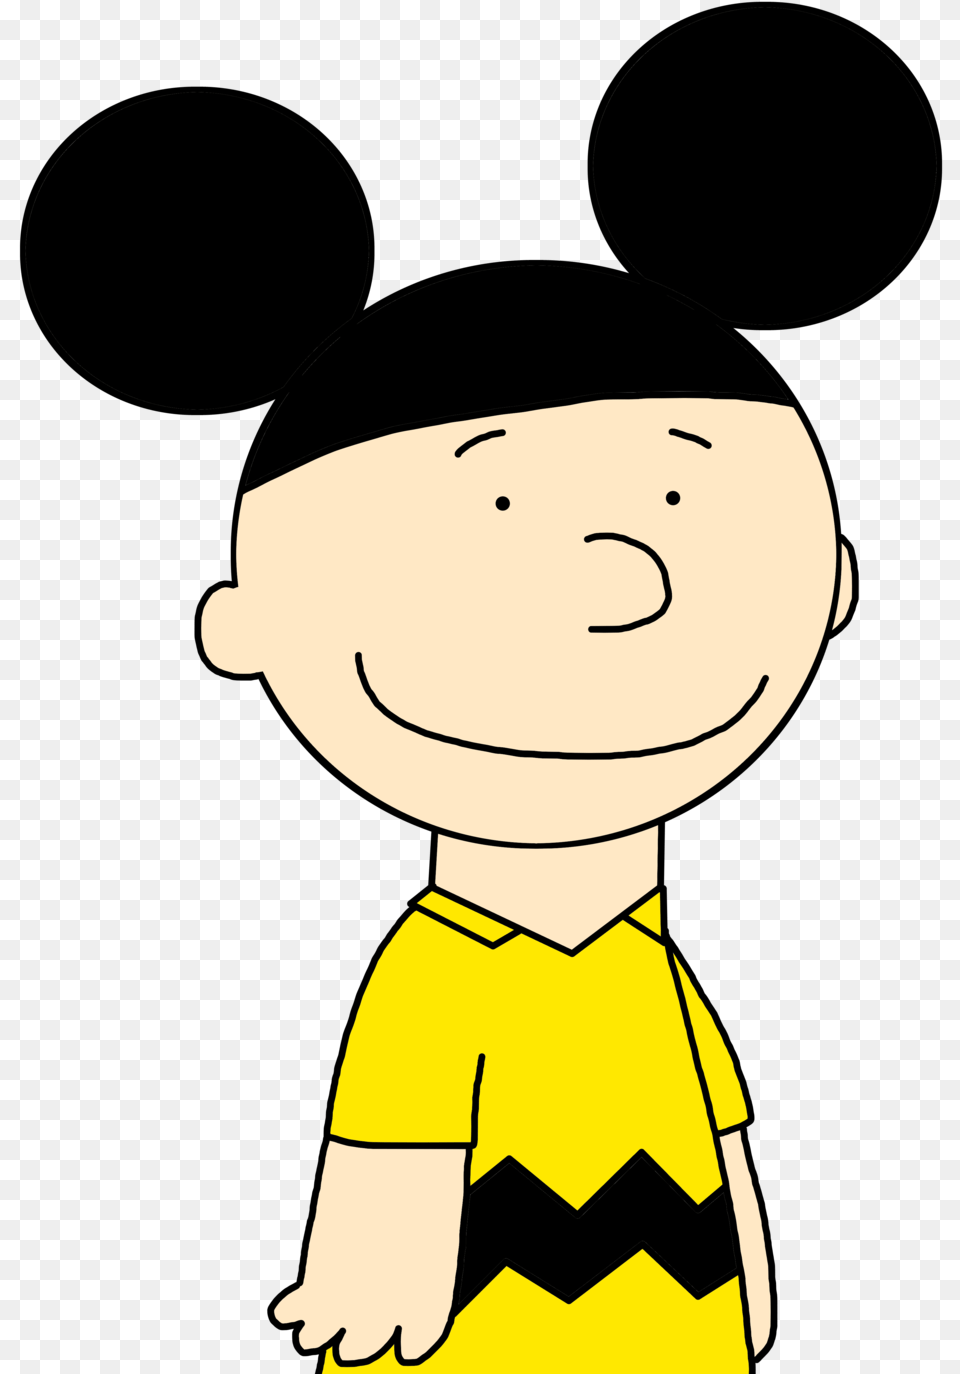 Charlie Brown With Mickey Mouse Ears By Marcospower1996 Charlie Brown Mickey Mouse, Cartoon, Baby, Person, Face Free Png